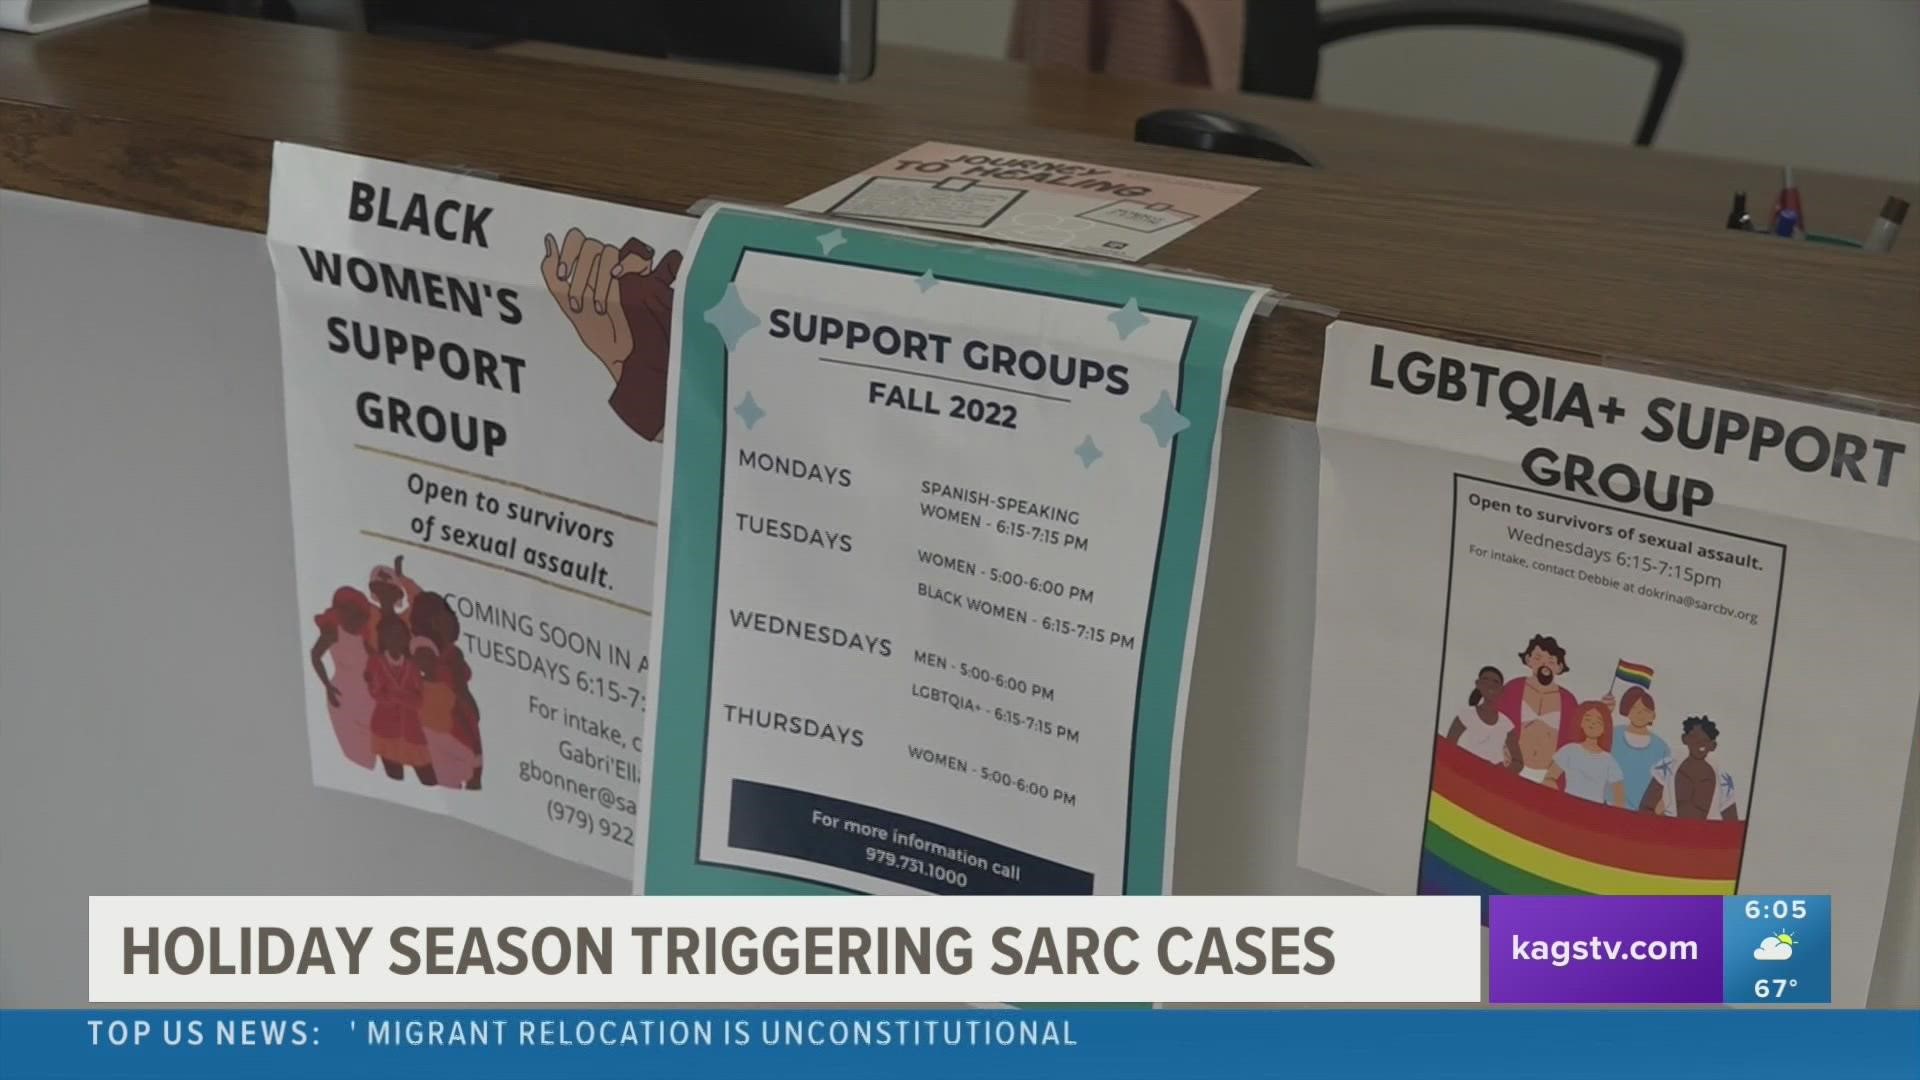 With domestic violence on the rise in the Brazos Valley, SARC wants to remind people that there are people that can be reached out to for help and support.